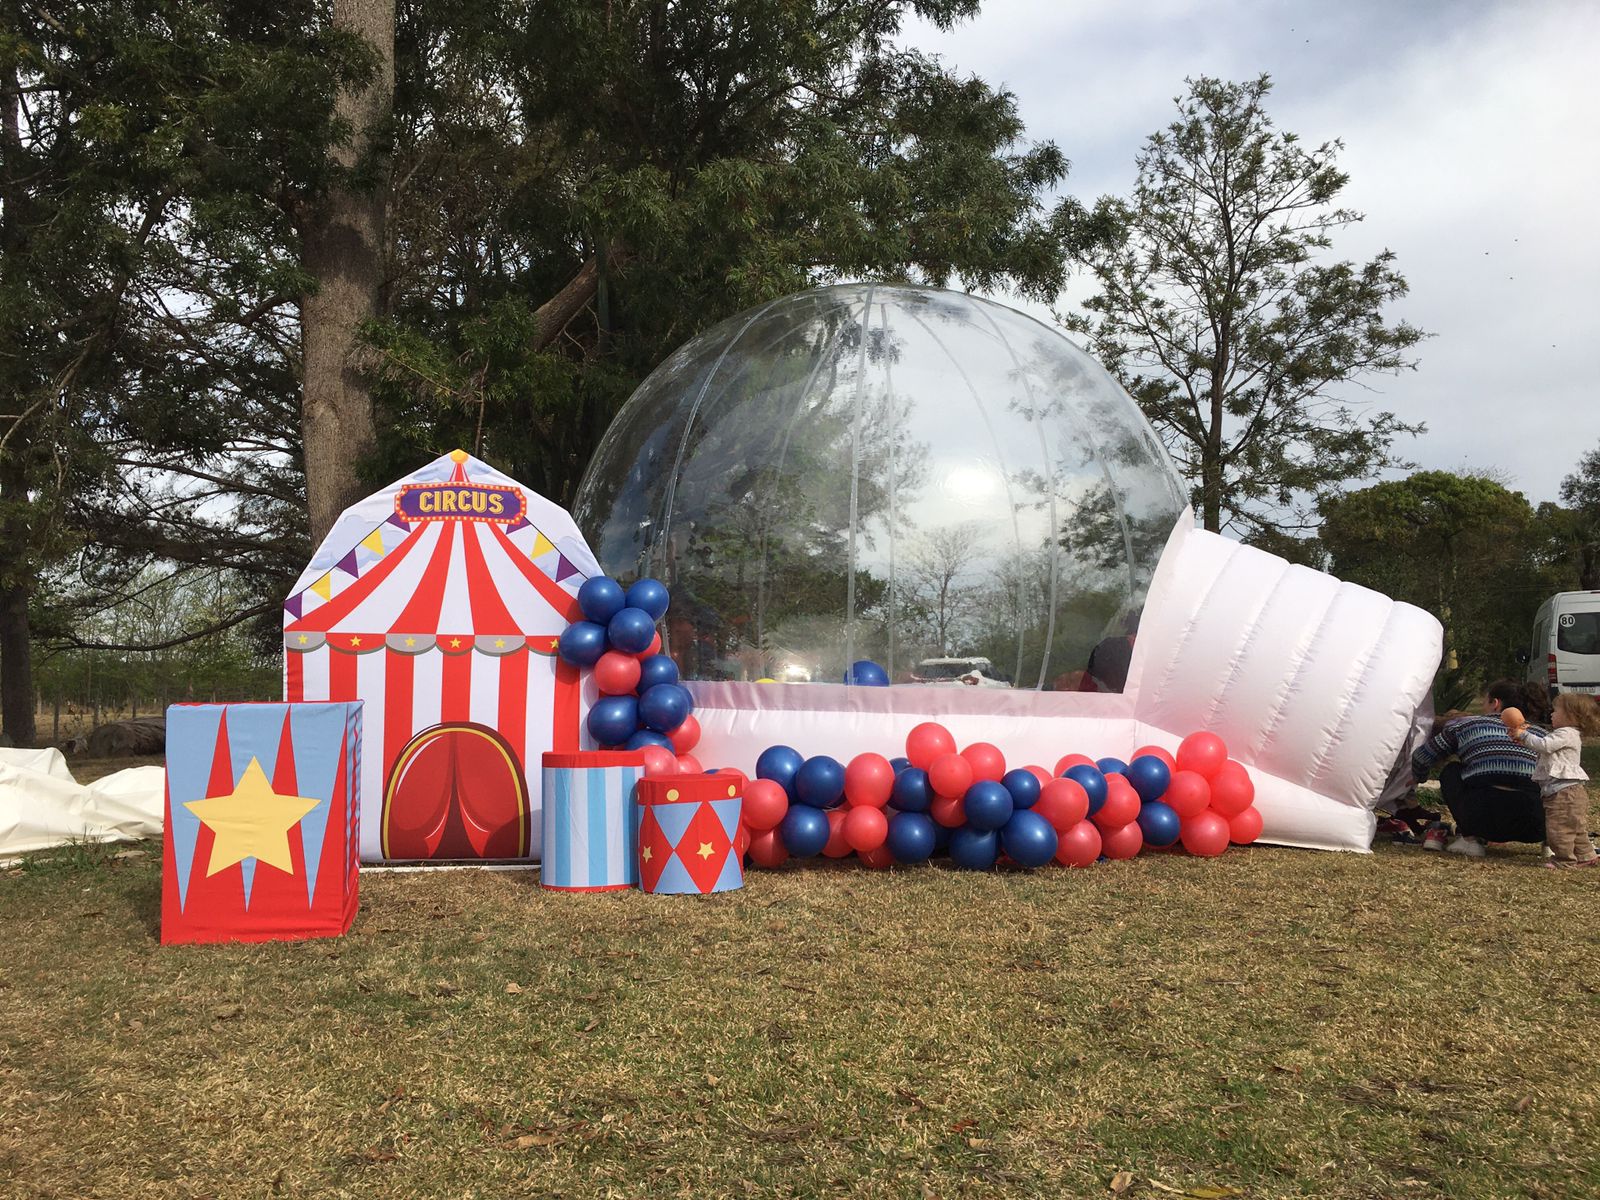 Burbuja Inflable - Special Tents, Inflatable Art - Boreas Designs